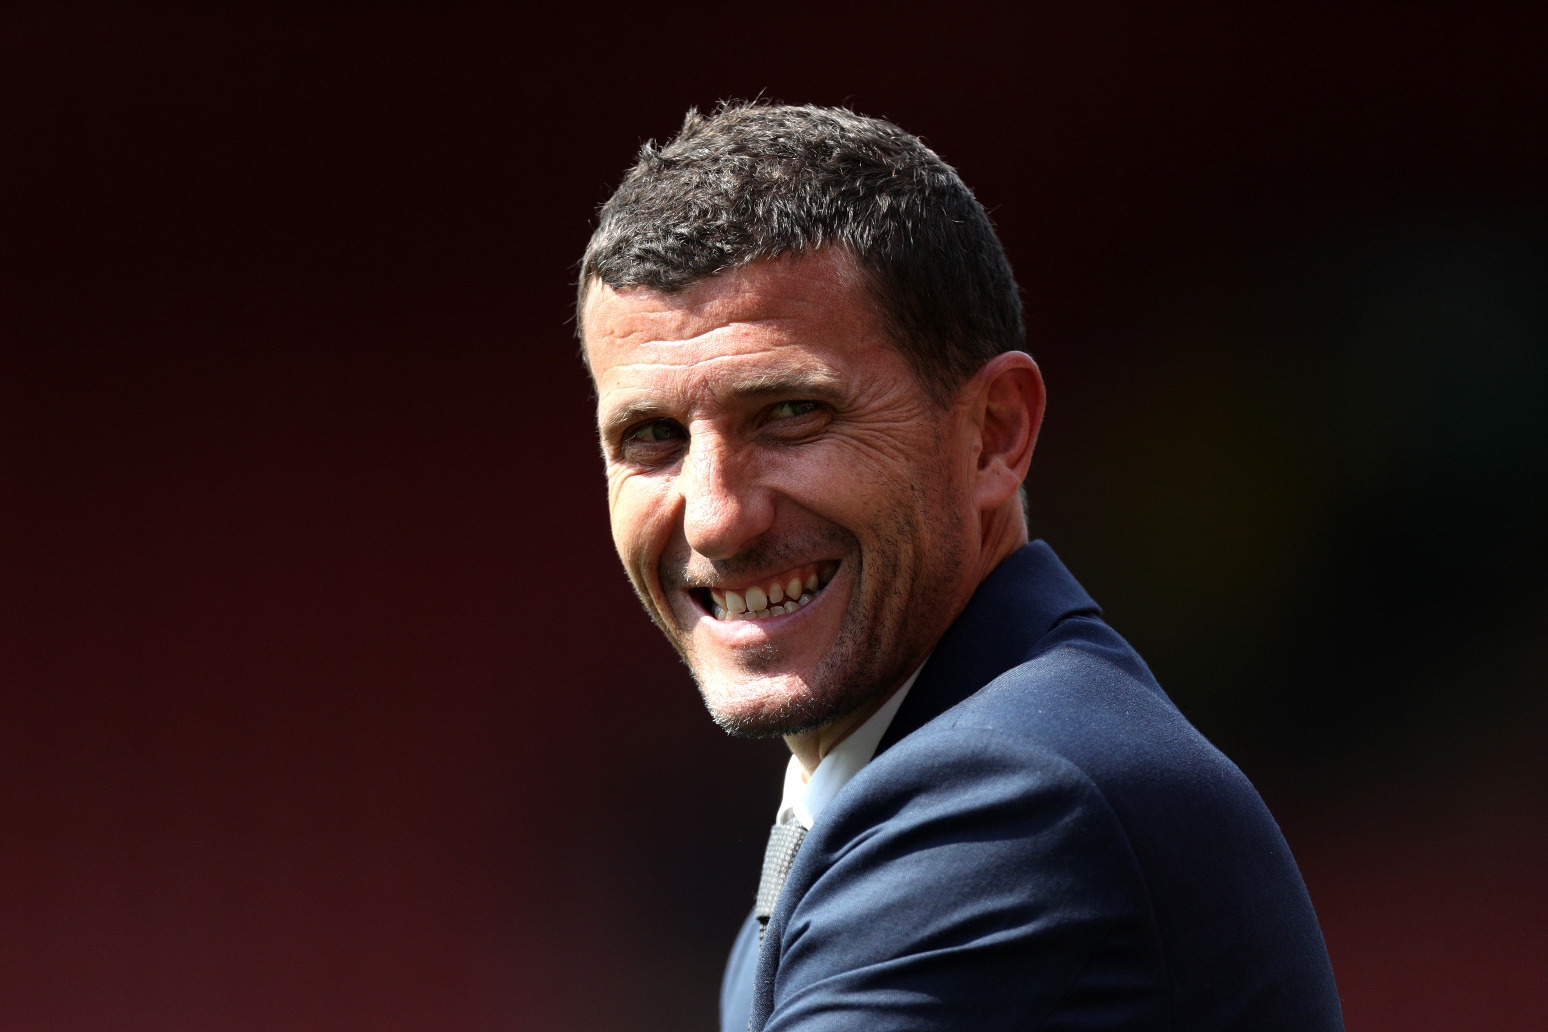 Leeds appoint Javi Gracia as boss on ‘flexible’ contract 